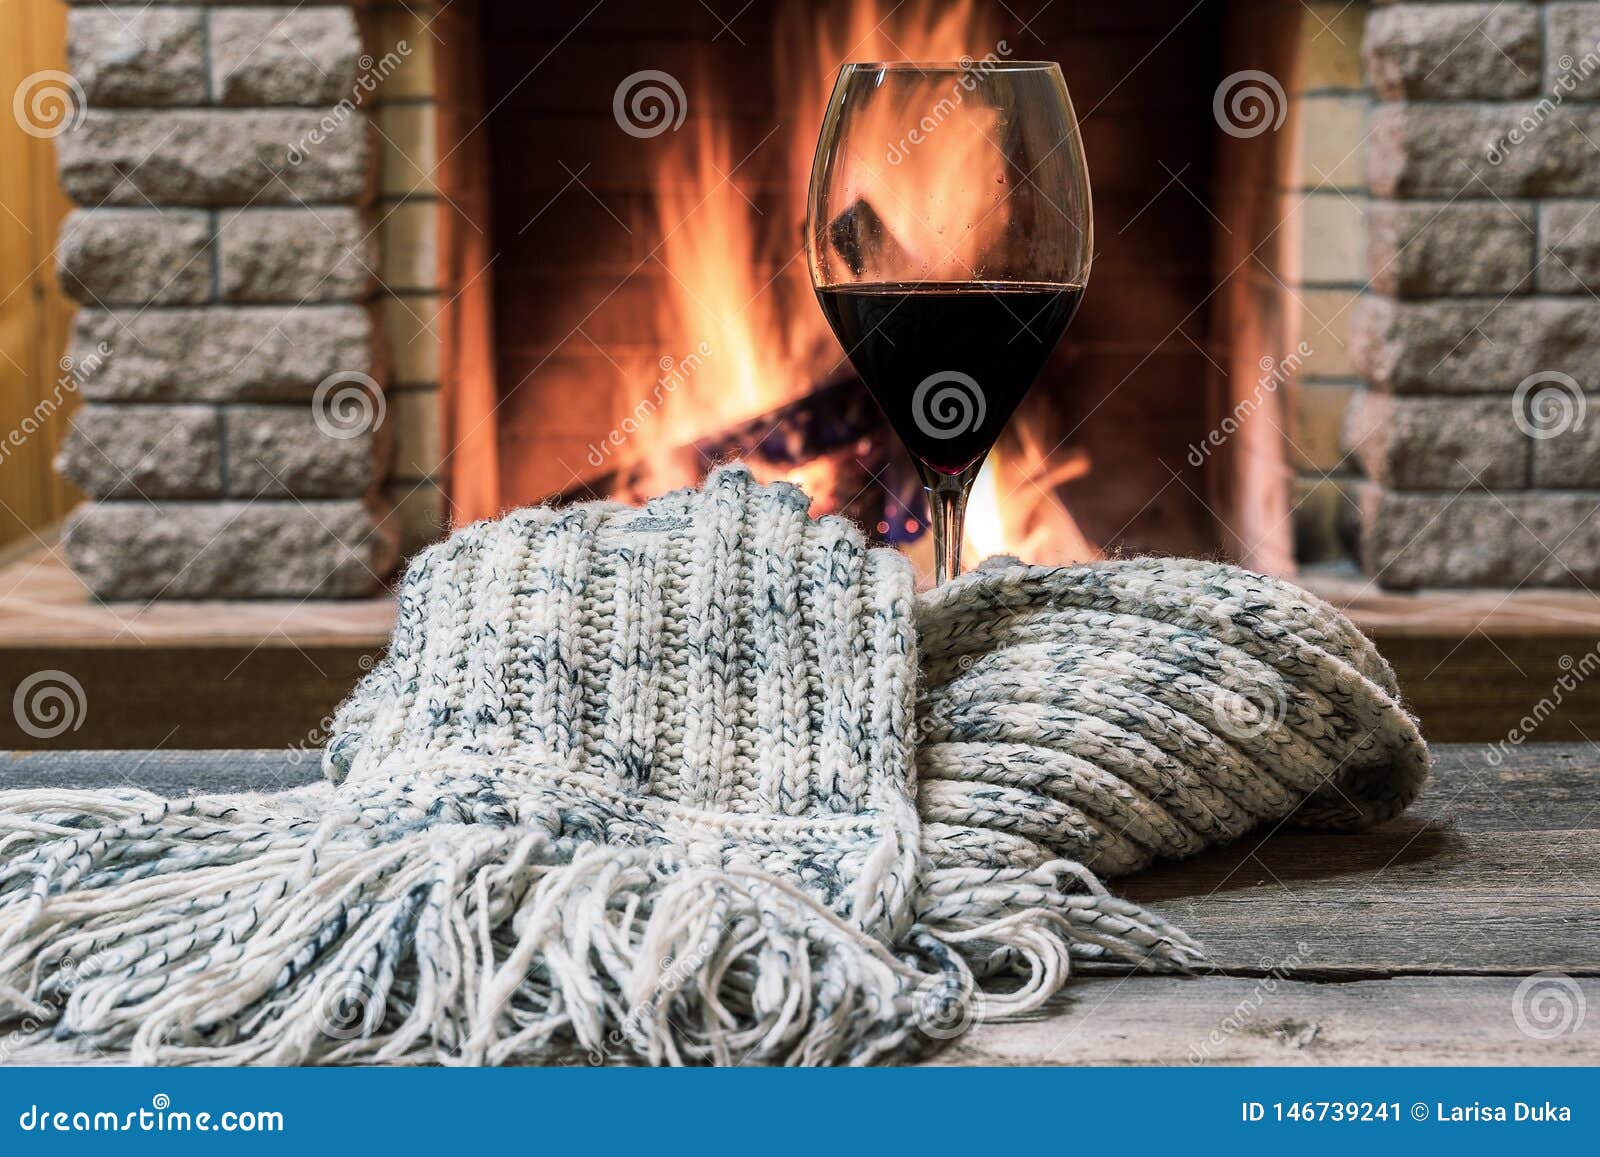 glass of wine against cozy fireplace background, hygge concept